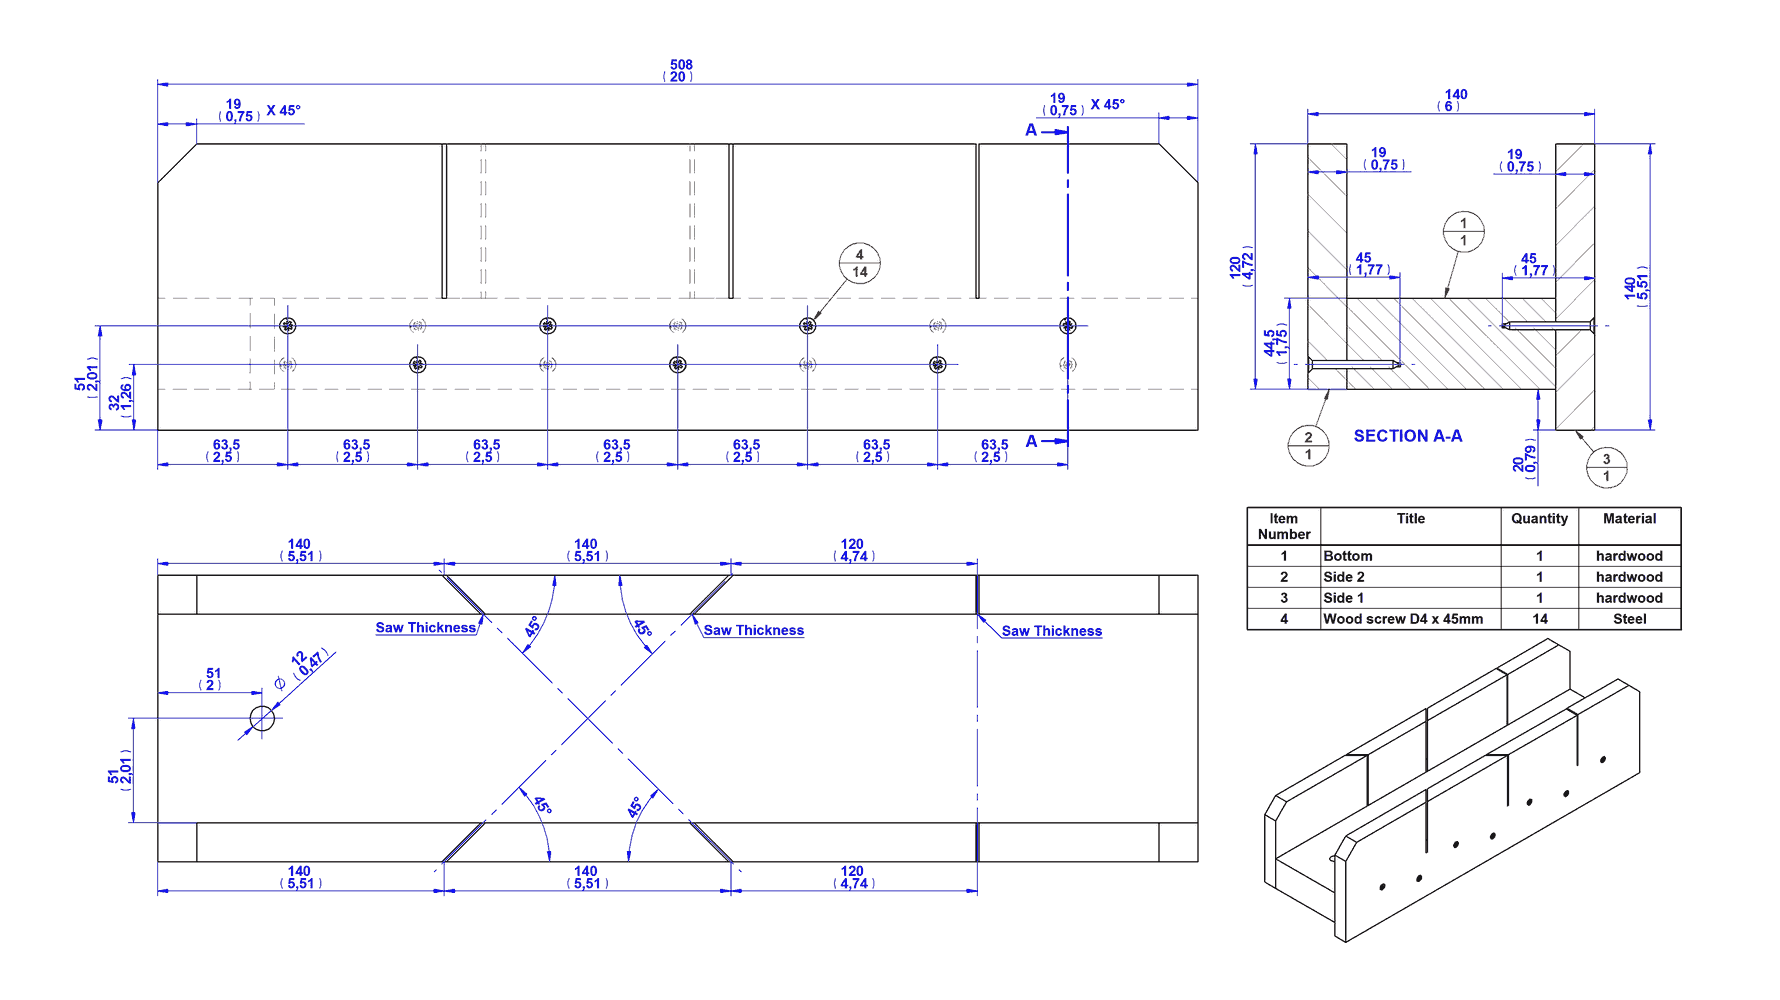 http://www.craftsmanspace.com/free-projects/wooden-puzzle-box-plan 